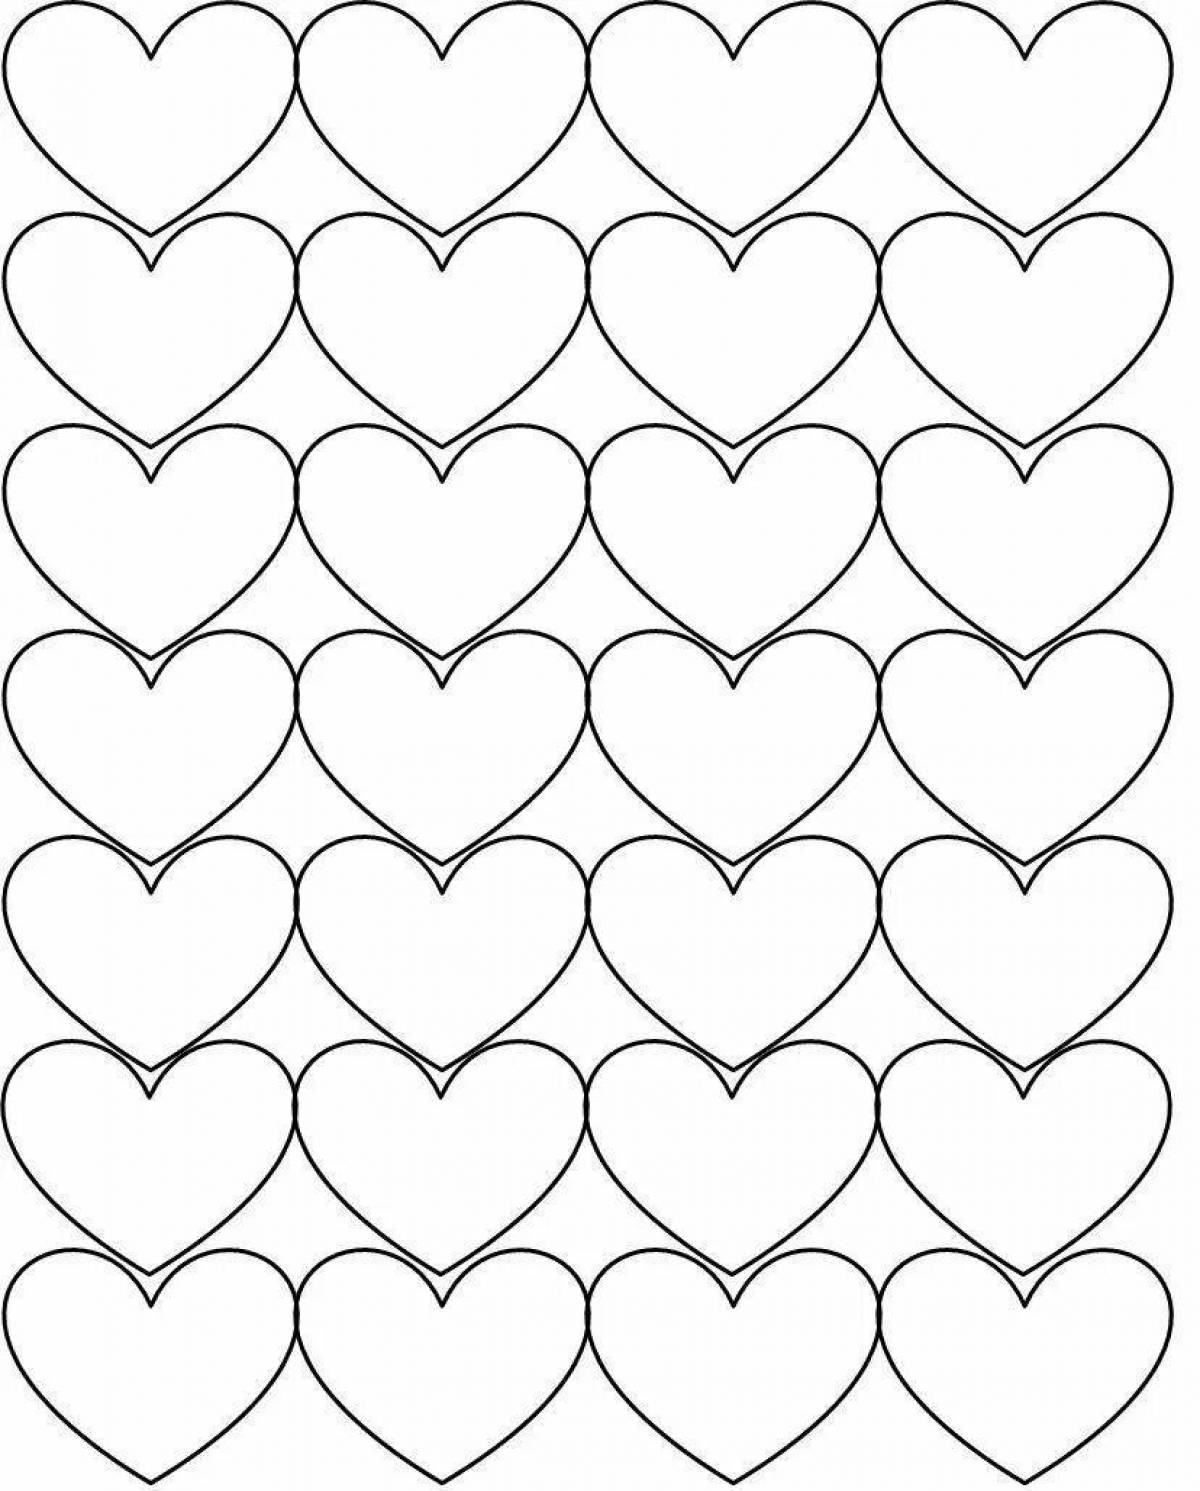 Amazing little heart coloring pages